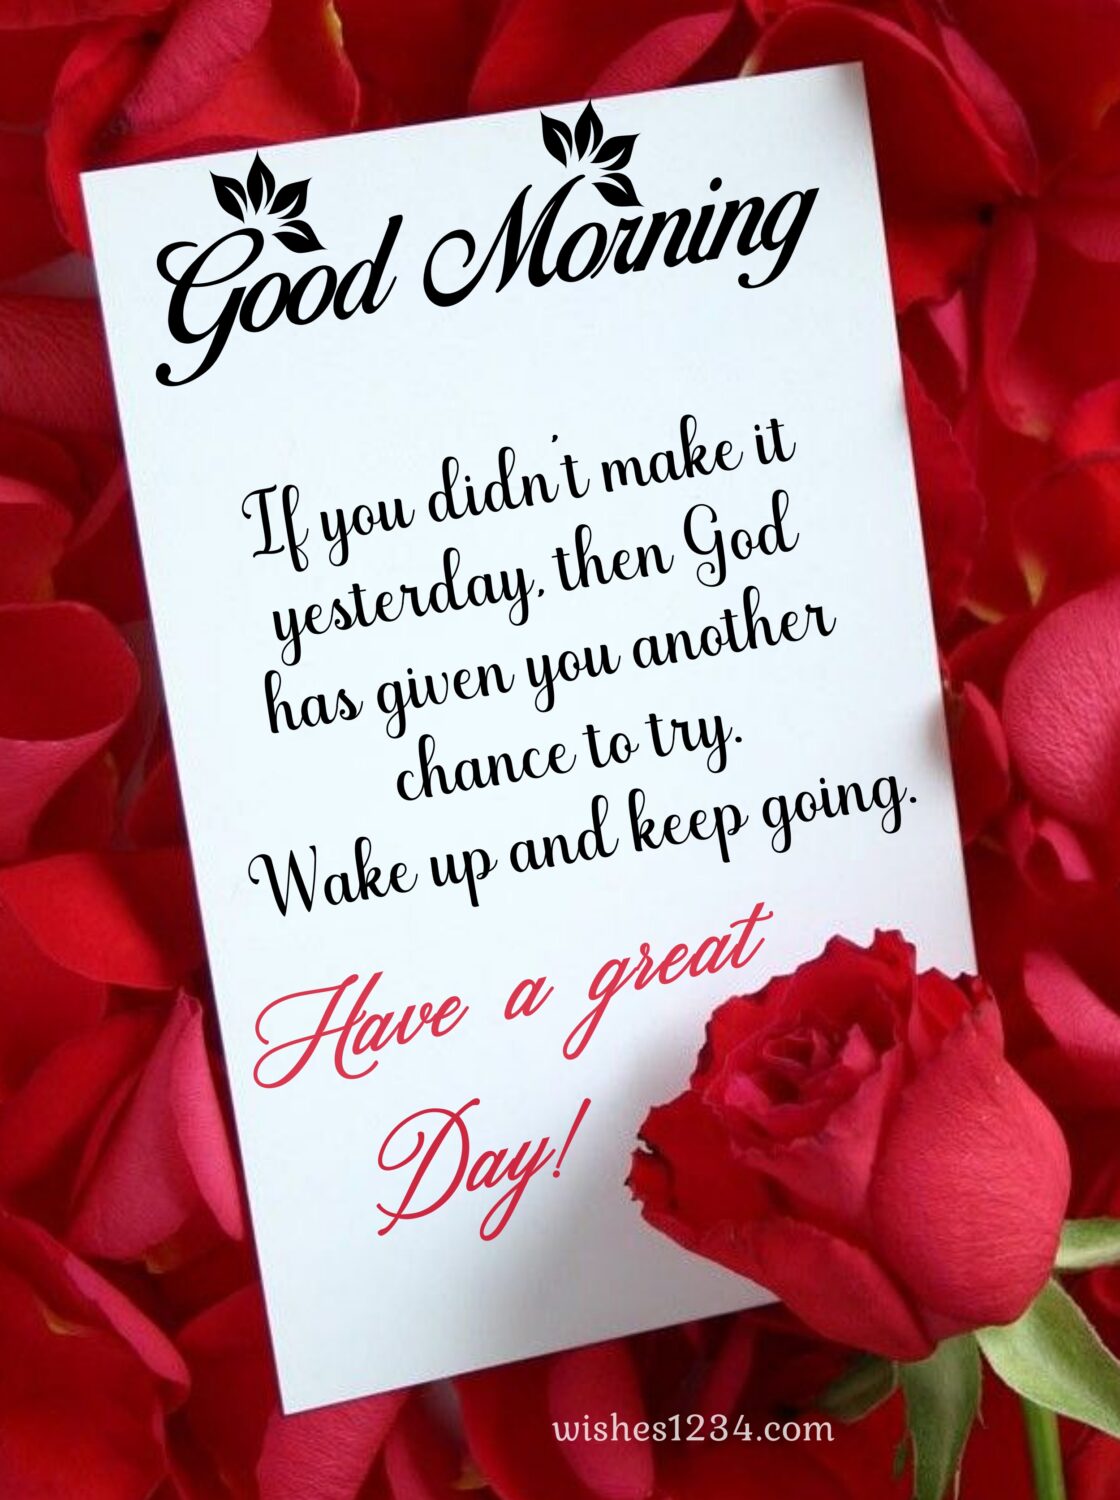 Rose petals with good morning message, Good Morning Messages.